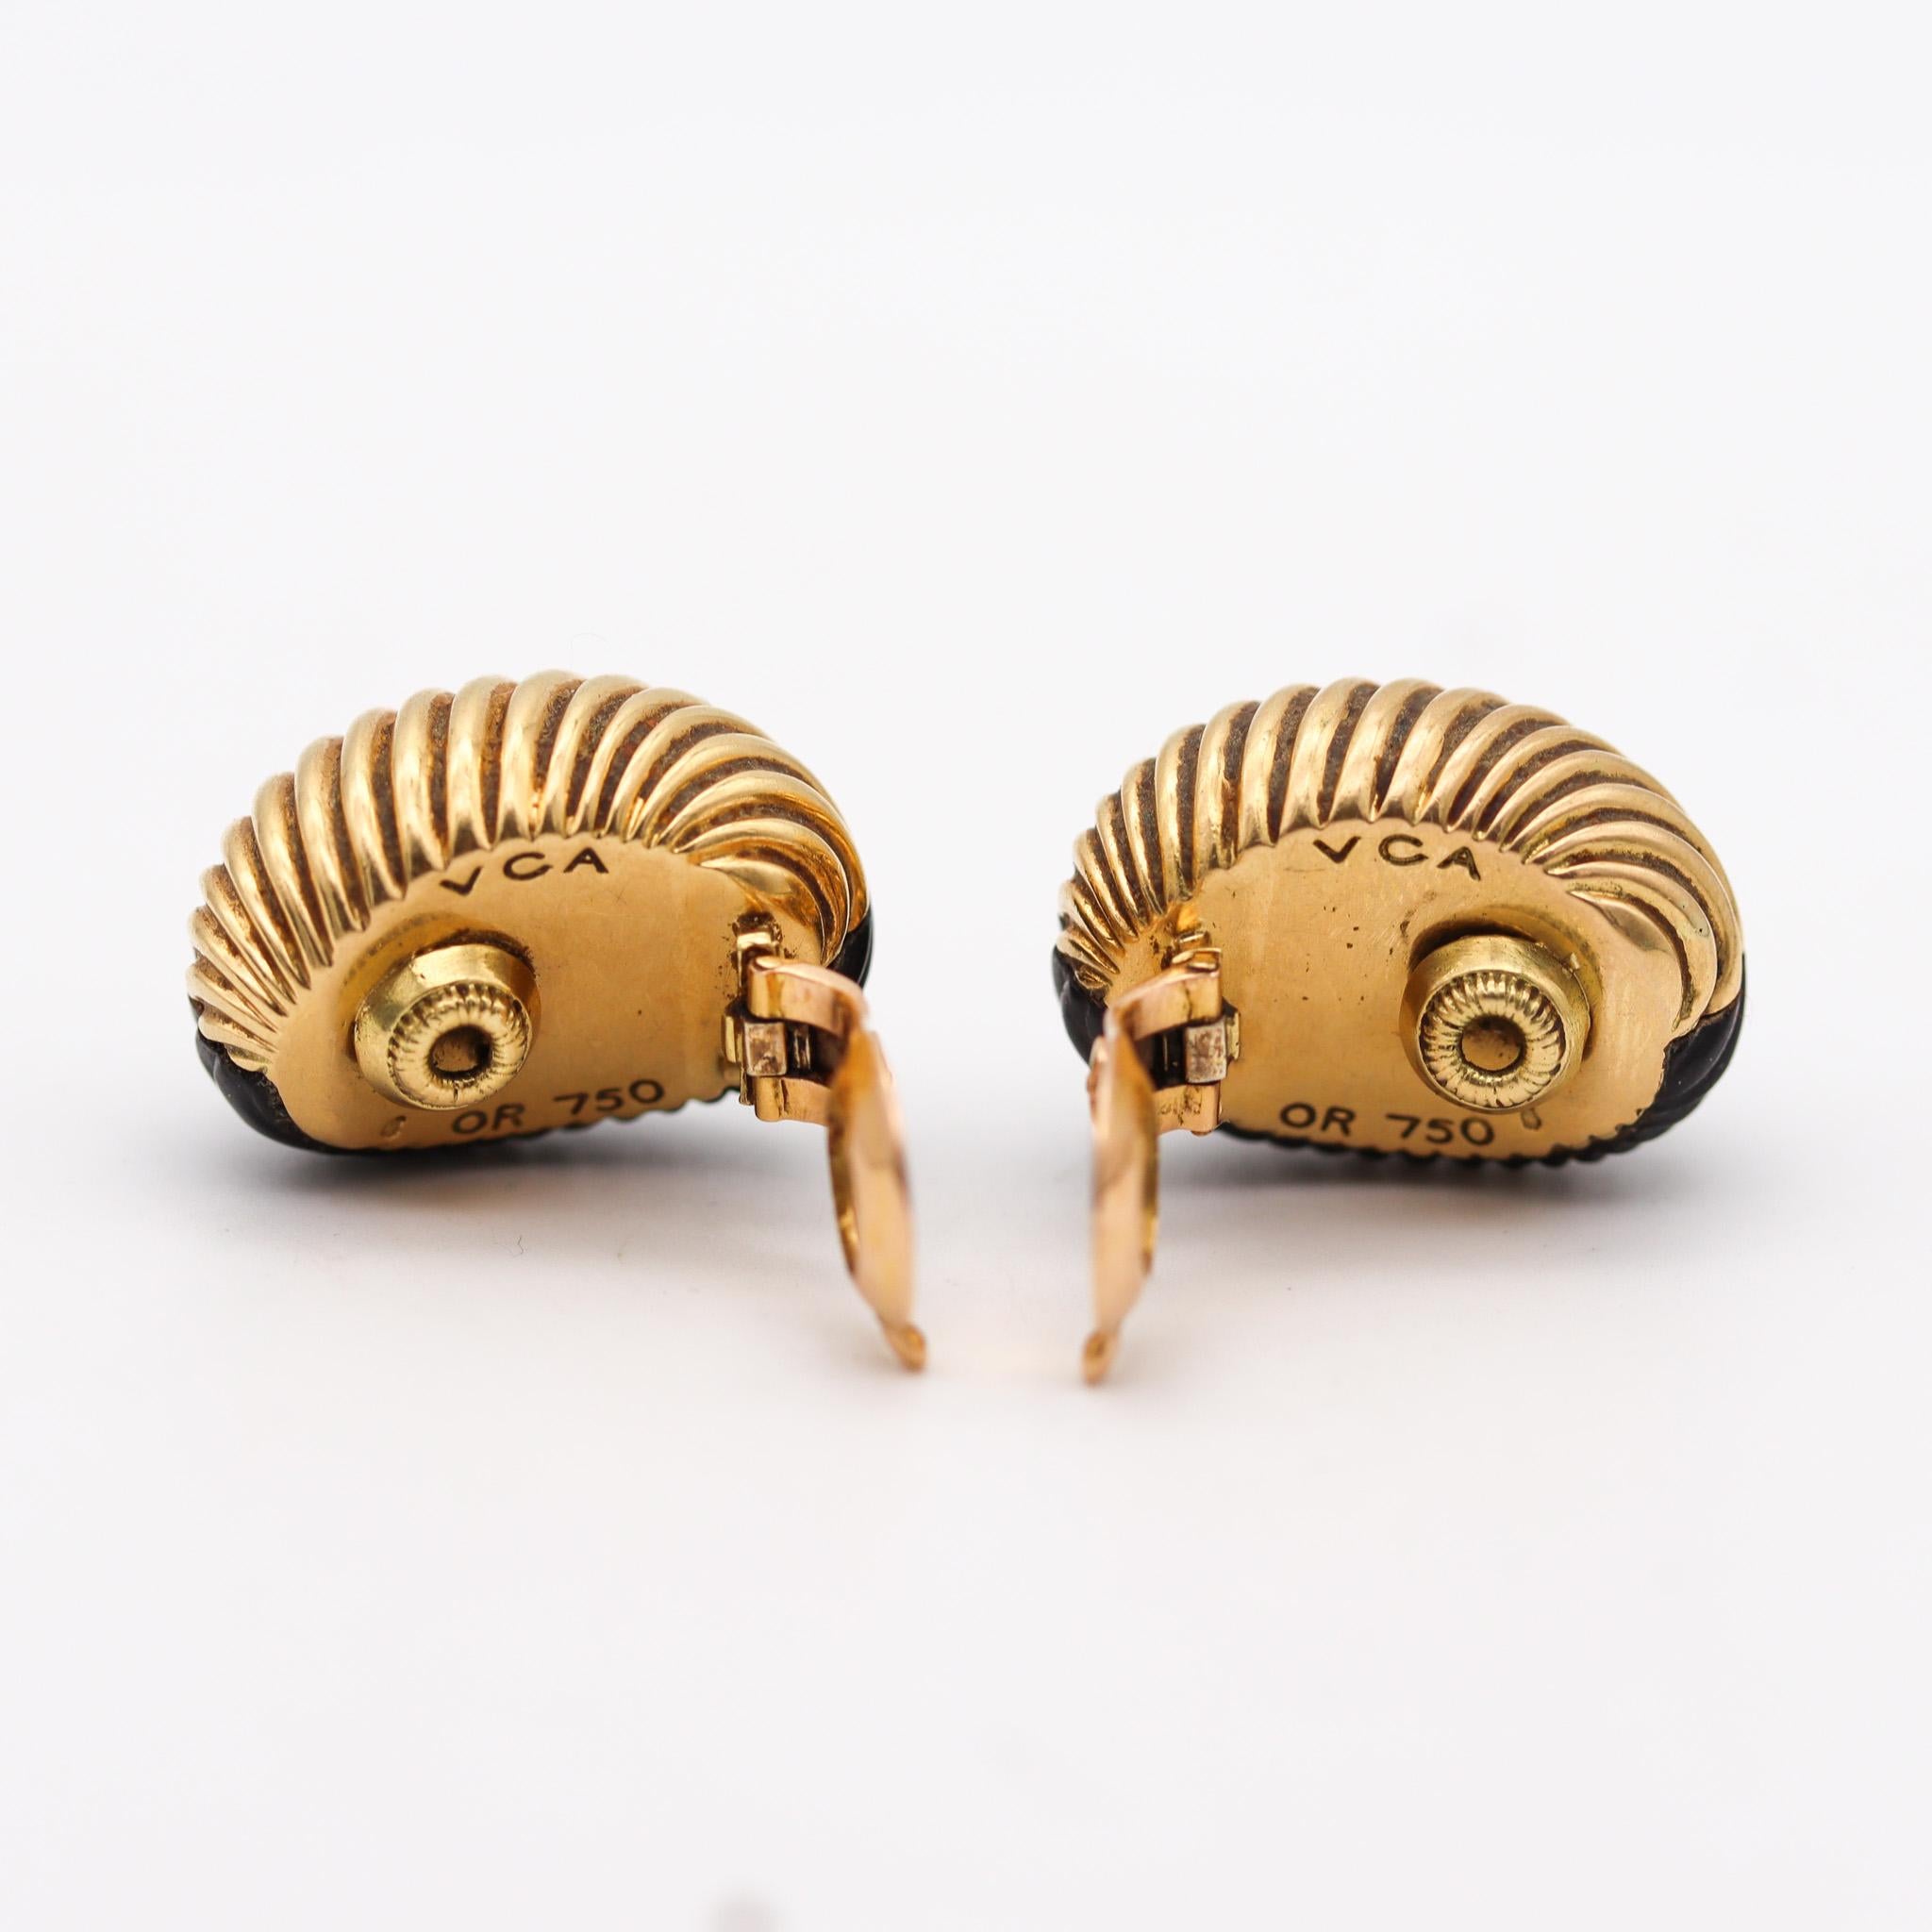 Modernist Van Cleef & Arpels 1970 Paris Clips On Earrings In 18Kt Gold With Carved Wood For Sale